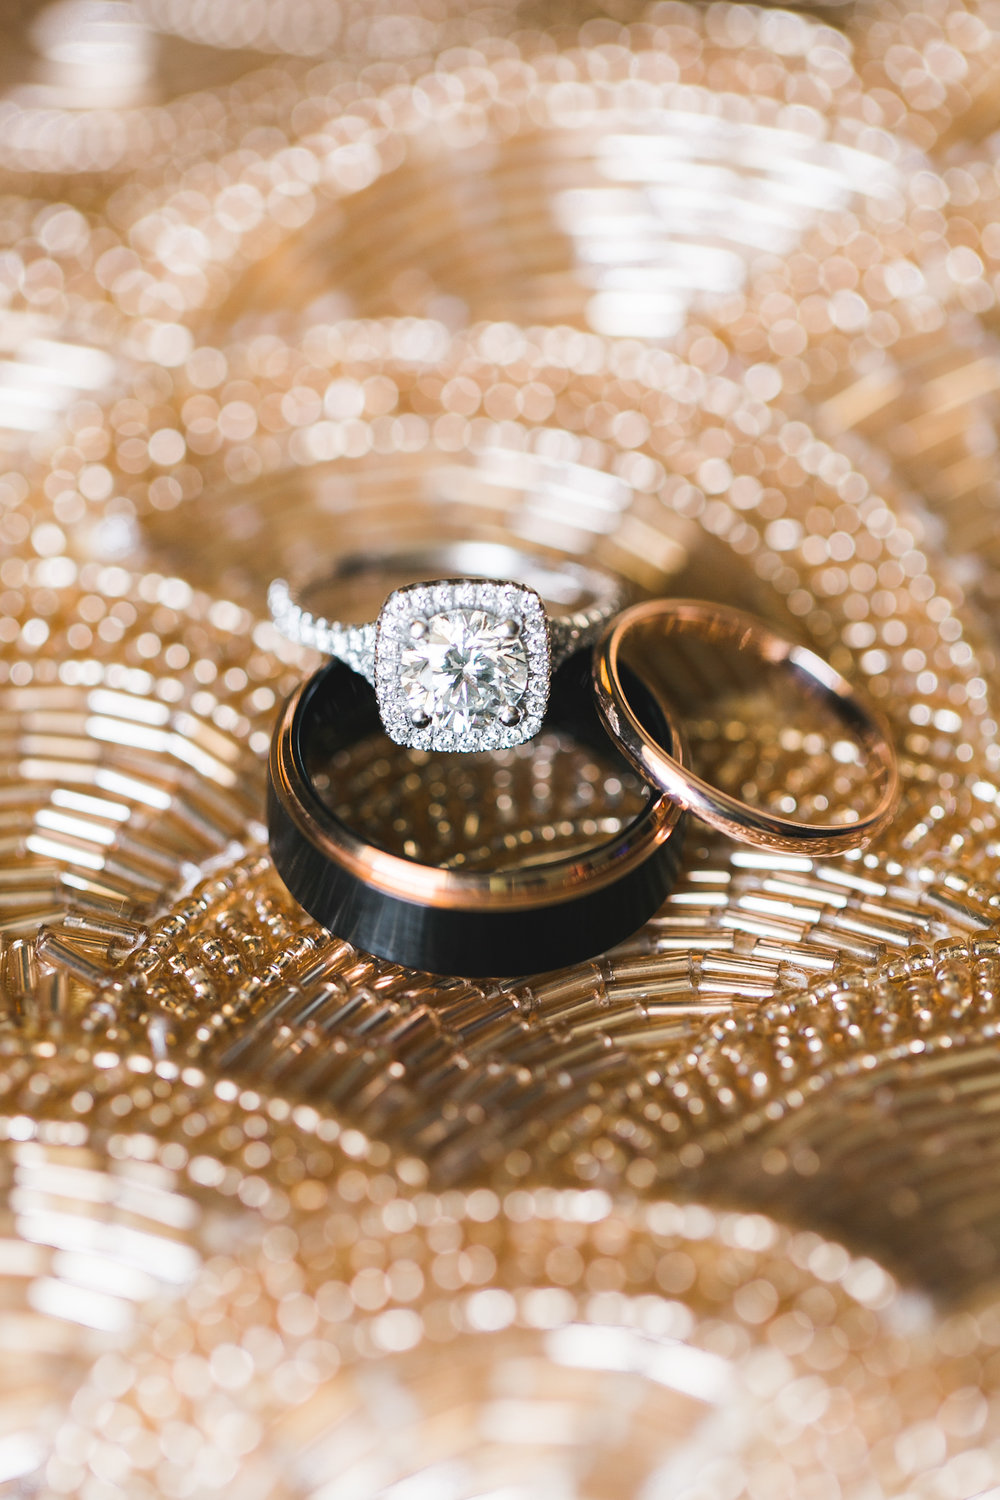 Loved their ring choices. &nbsp;A whole lotta diamonds and a touch of rose gold.